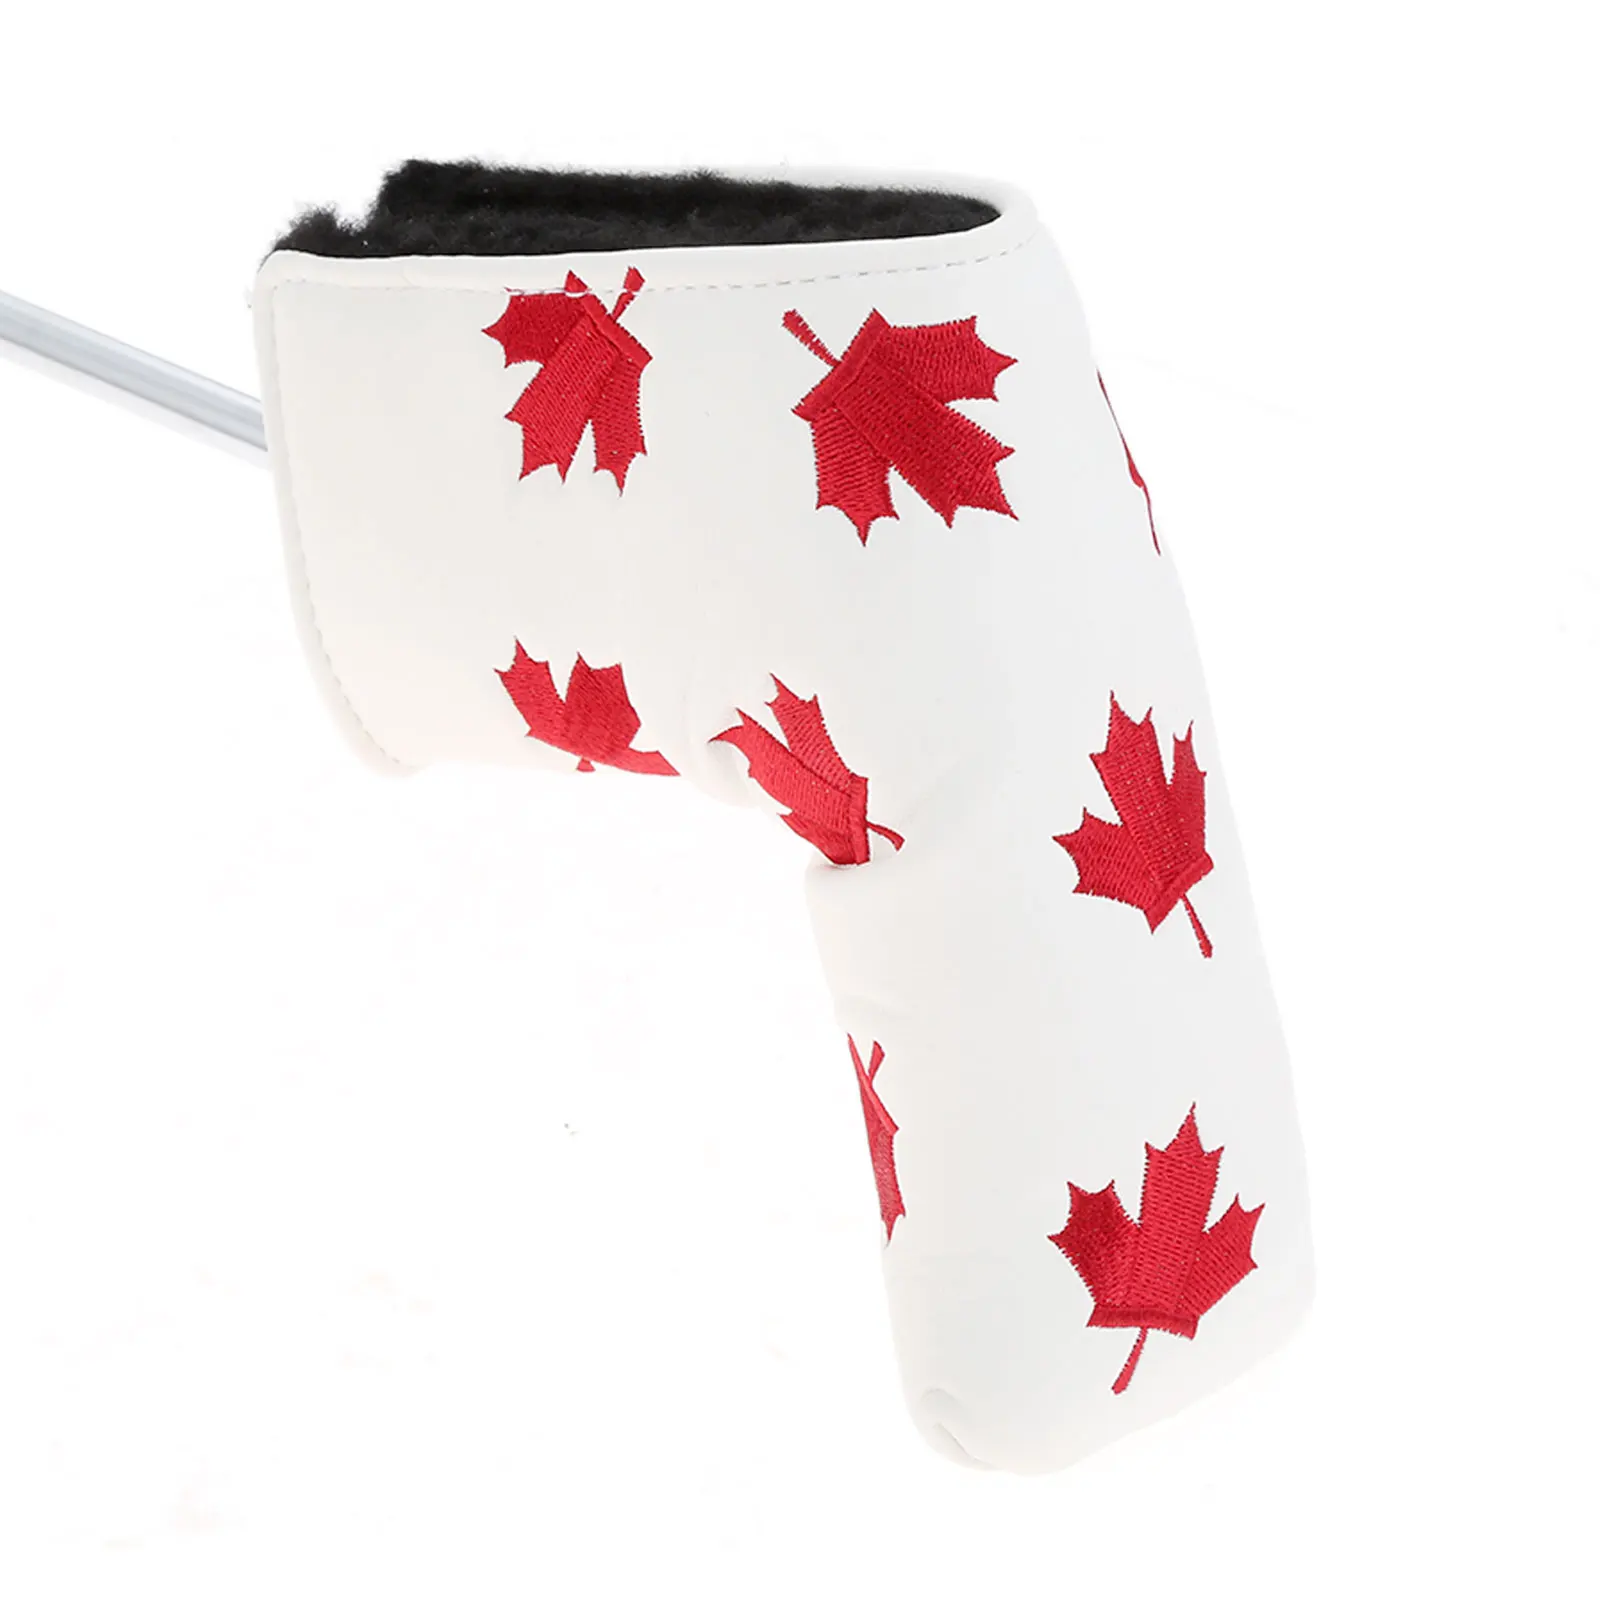 PU Golf Head Covers Protection Set Golf Canada Flag Red Maple Leaf Putter Head Cover HeadcoverFor Golf Blade Club Heads 1Pc